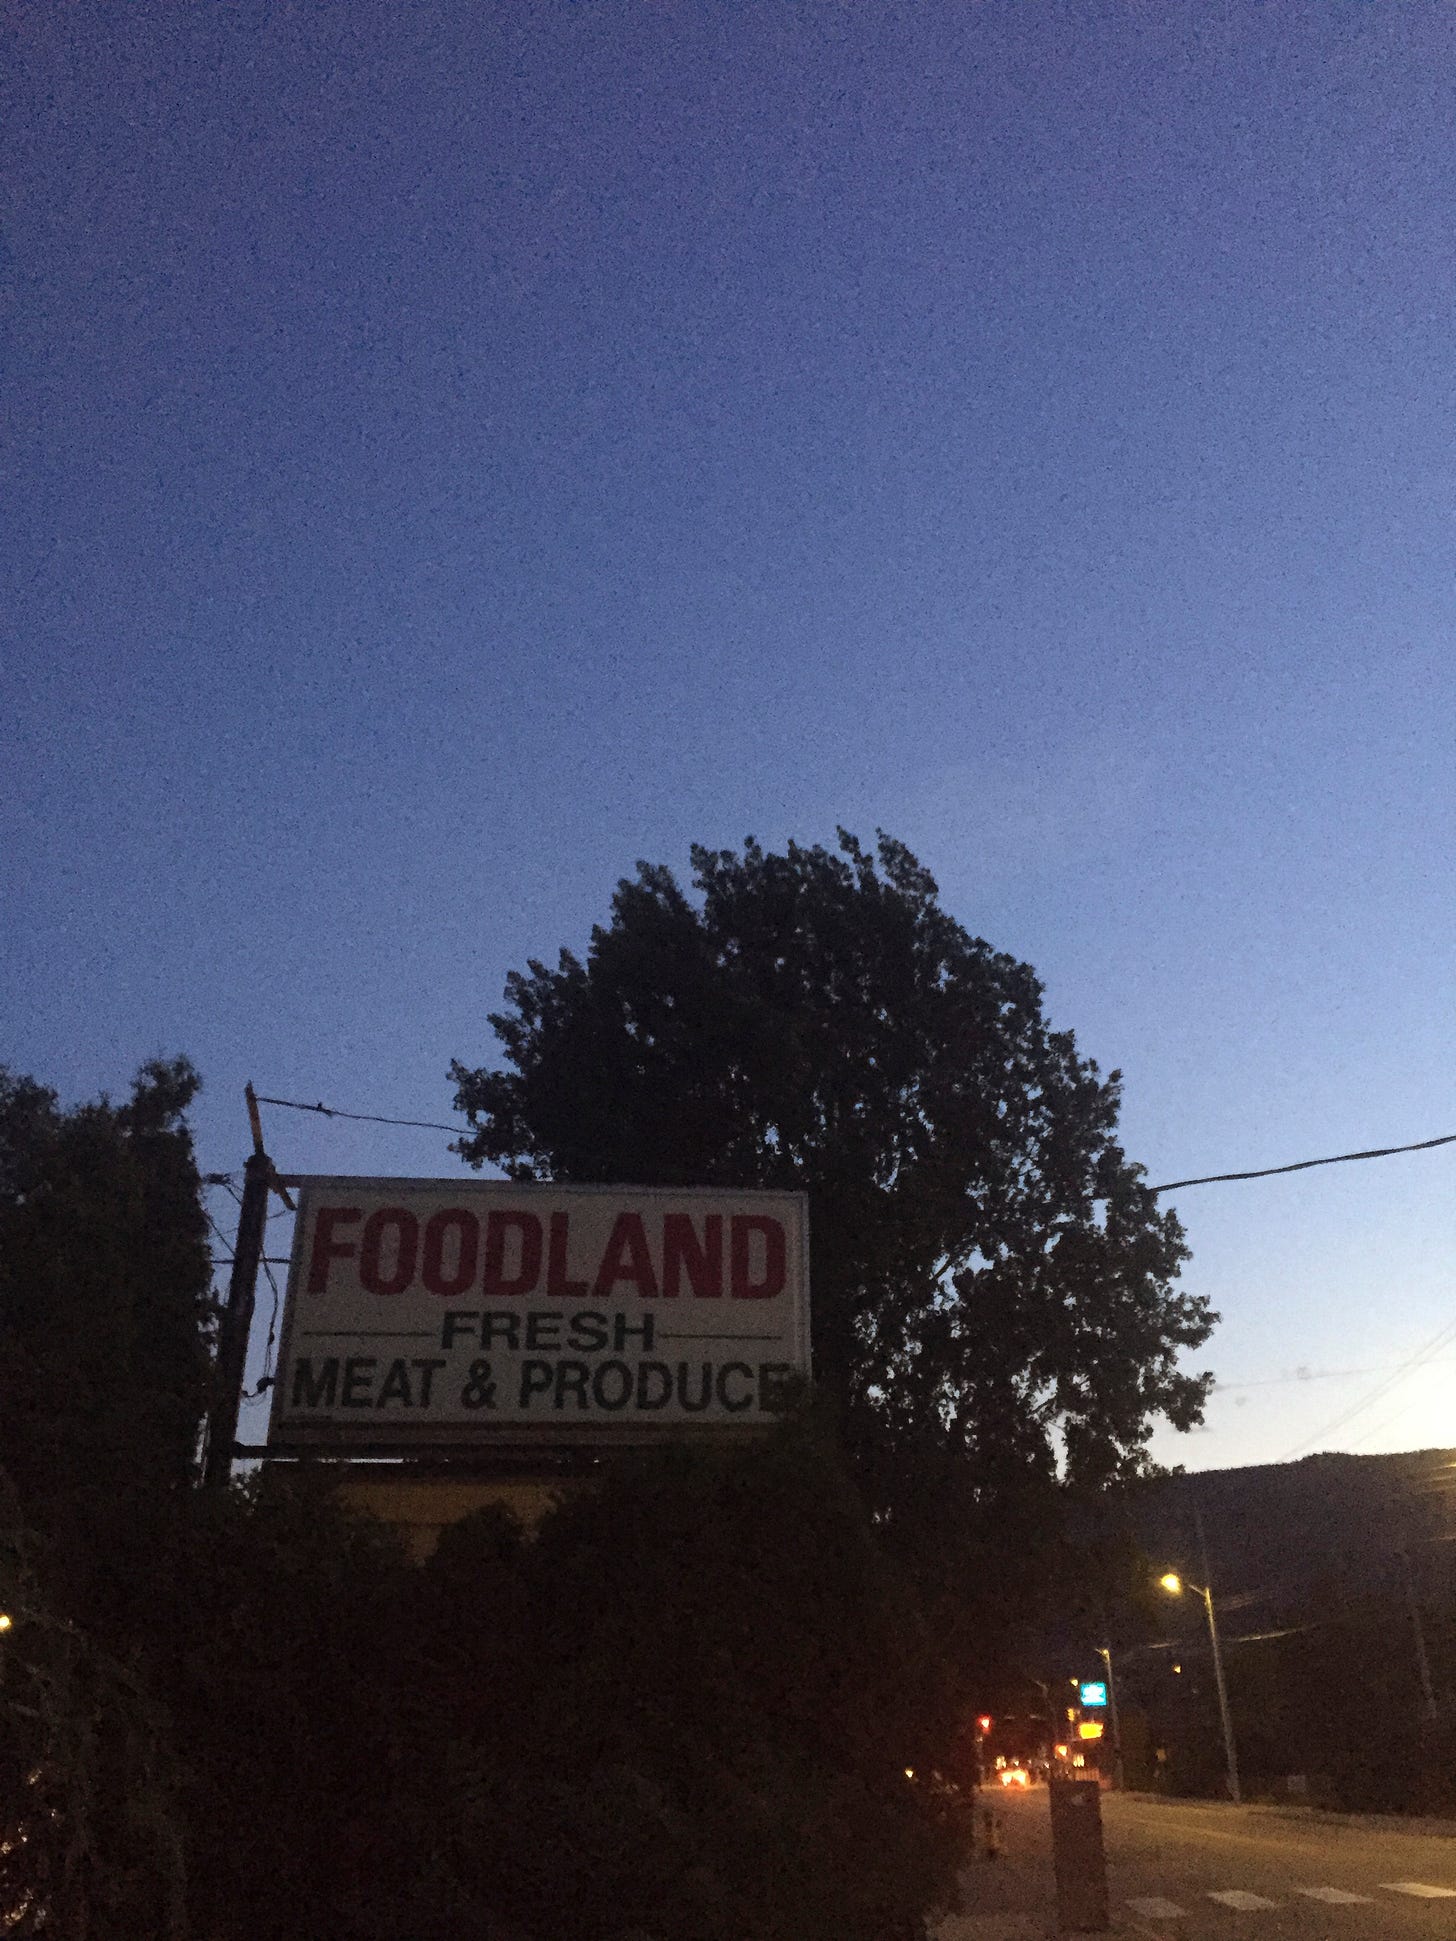 At twilight, a shop sign reading FOODLAND with the words 'fresh meat & produce' below it. In the background is a large tree, and streetlights lighting up the street to the right.